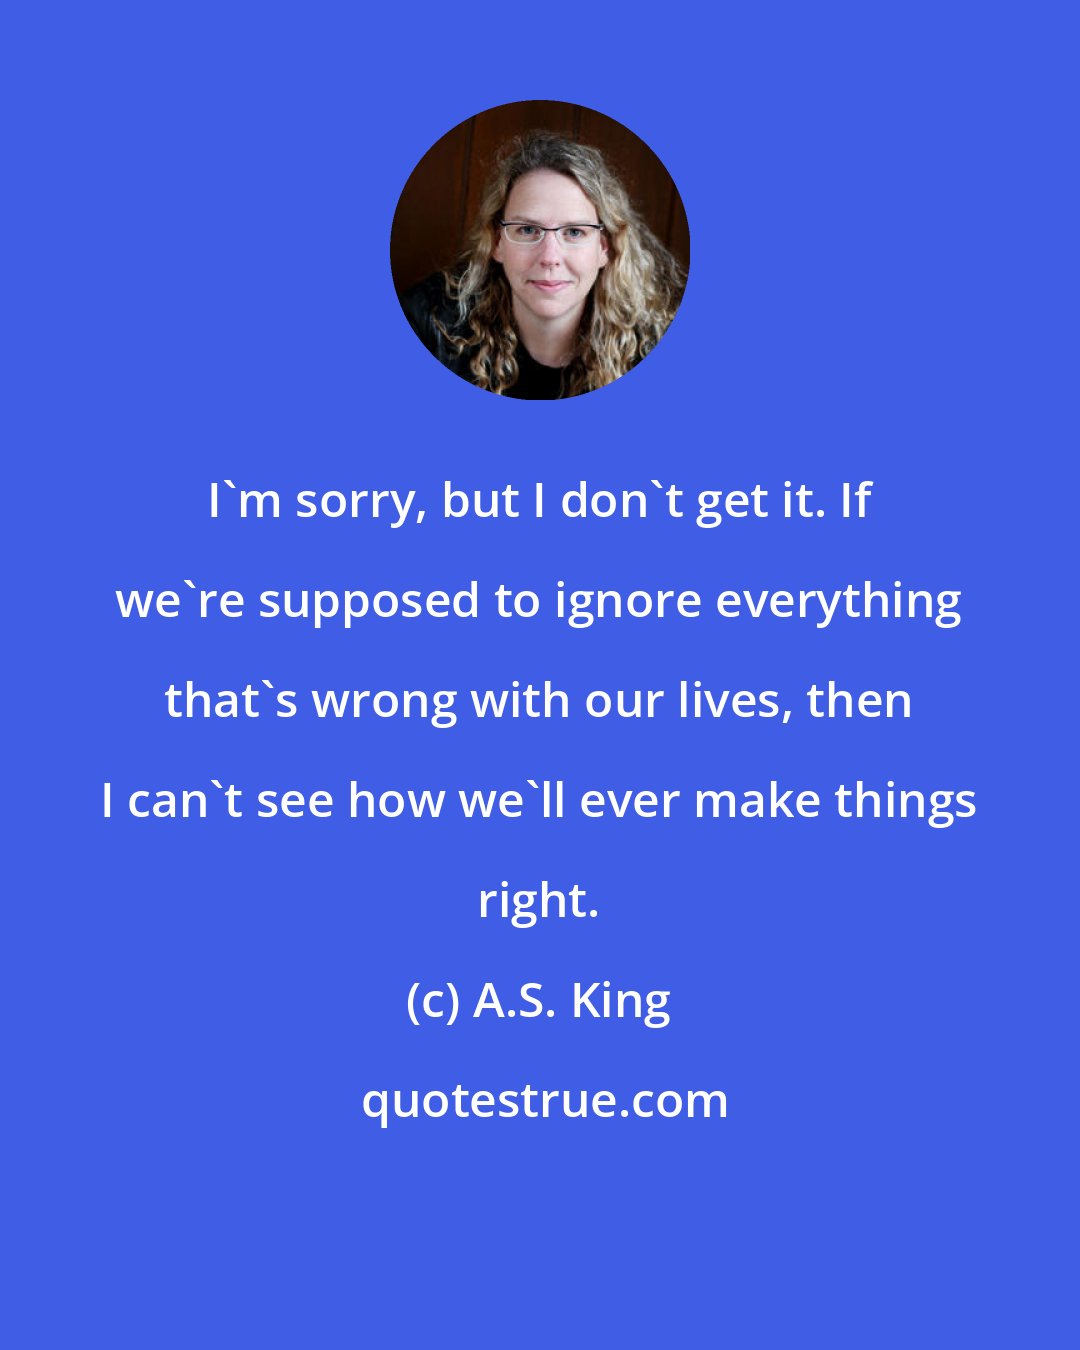 A.S. King: I'm sorry, but I don't get it. If we're supposed to ignore everything that's wrong with our lives, then I can't see how we'll ever make things right.